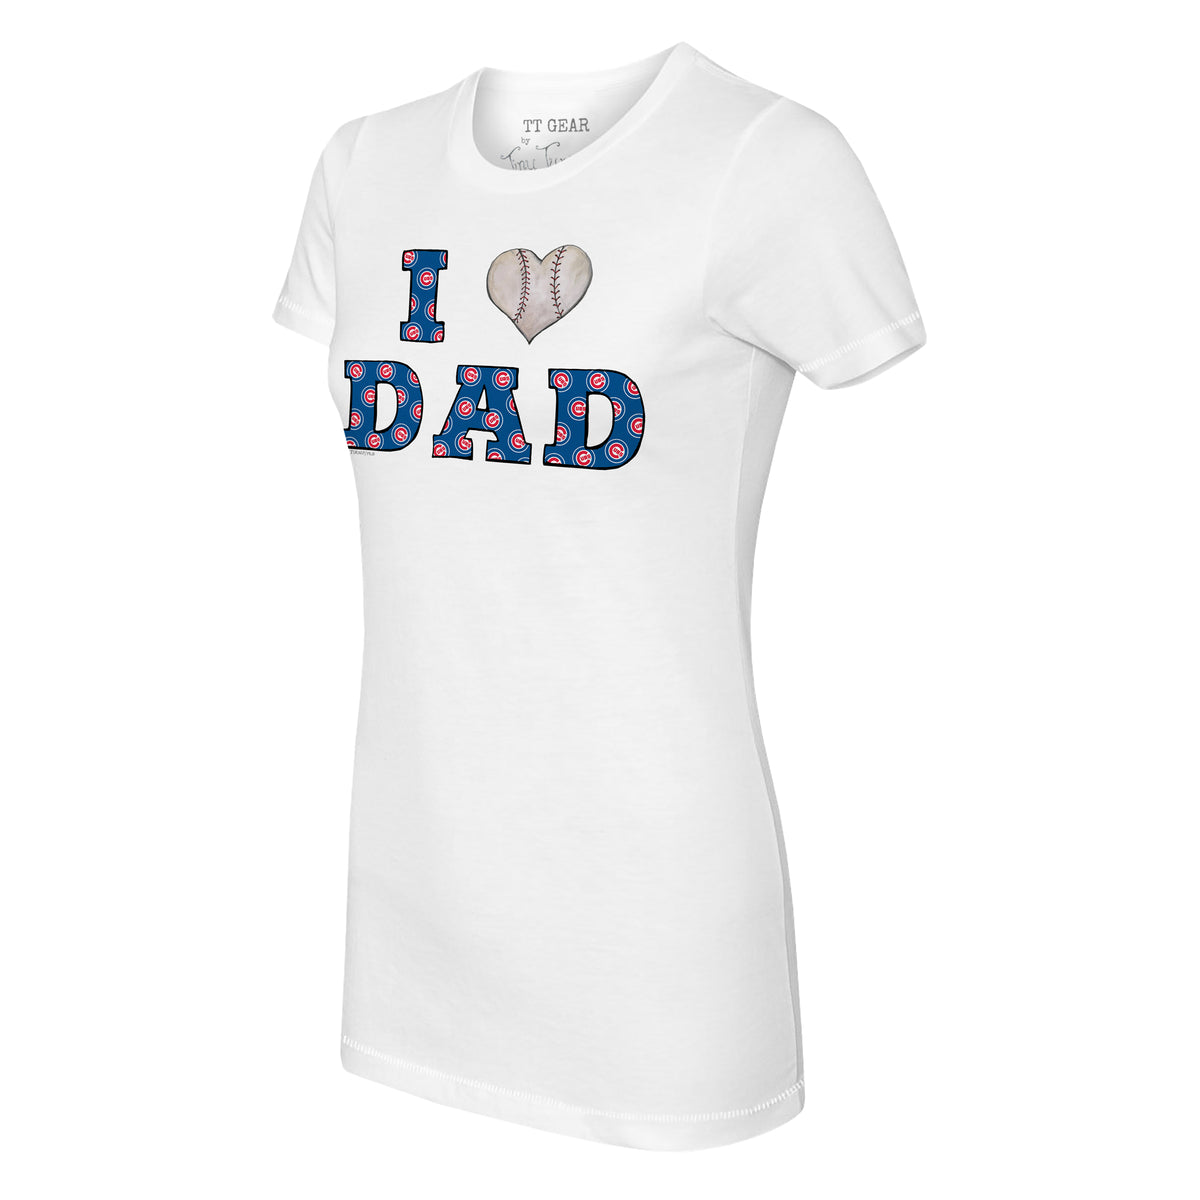 Chicago Cubs I Love Dad Tee Shirt